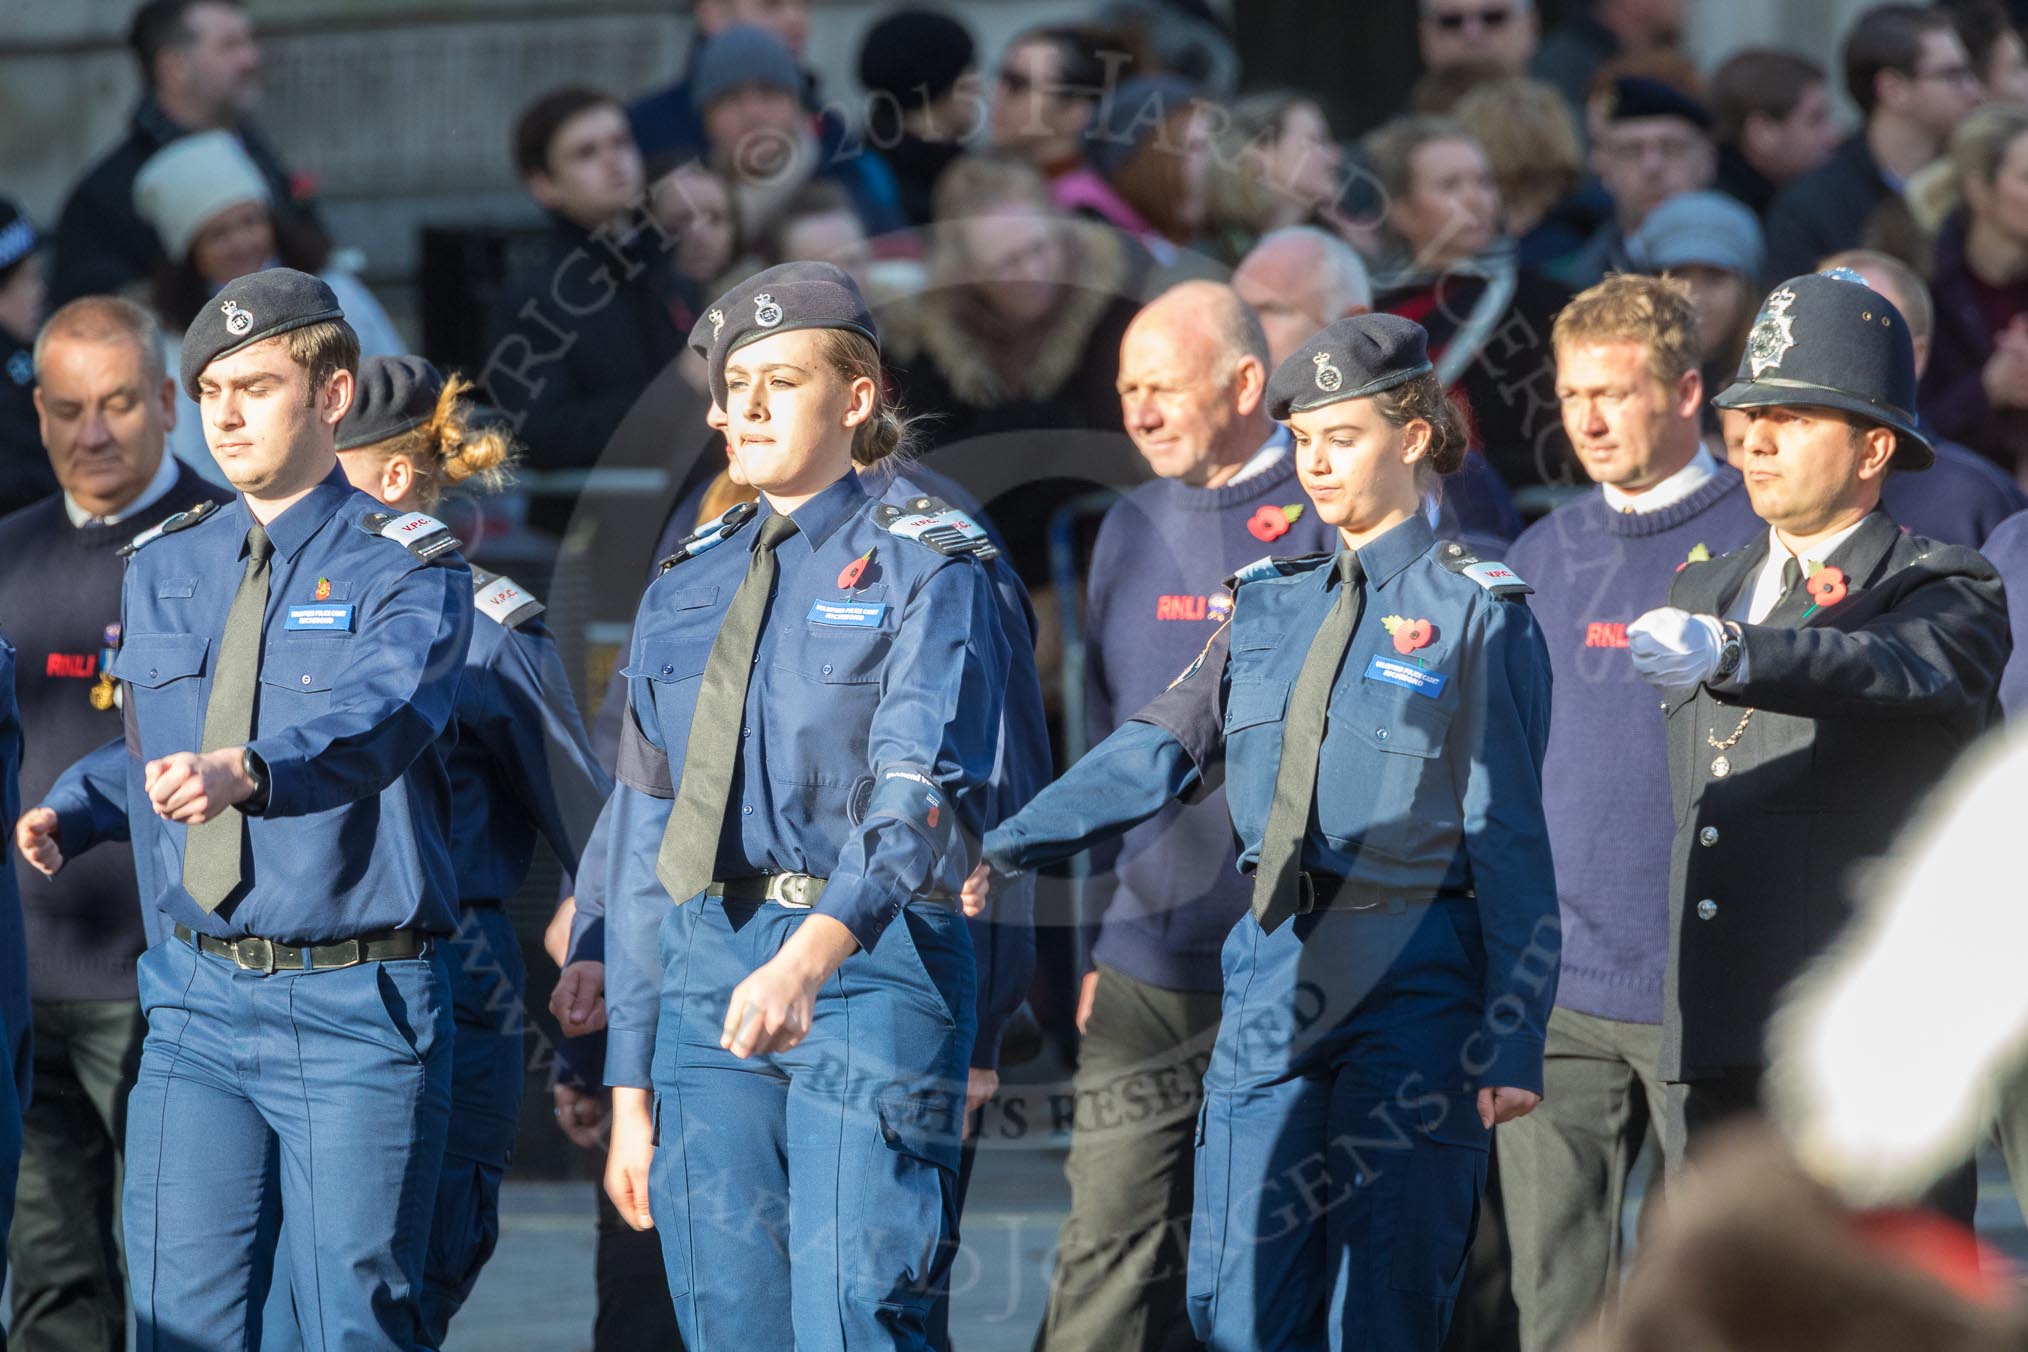 March Past, Remembrance Sunday at the Cenotaph 2016: M40 Richmond Volunteer Police Cadets.
Cenotaph, Whitehall, London SW1,
London,
Greater London,
United Kingdom,
on 13 November 2016 at 13:19, image #2944